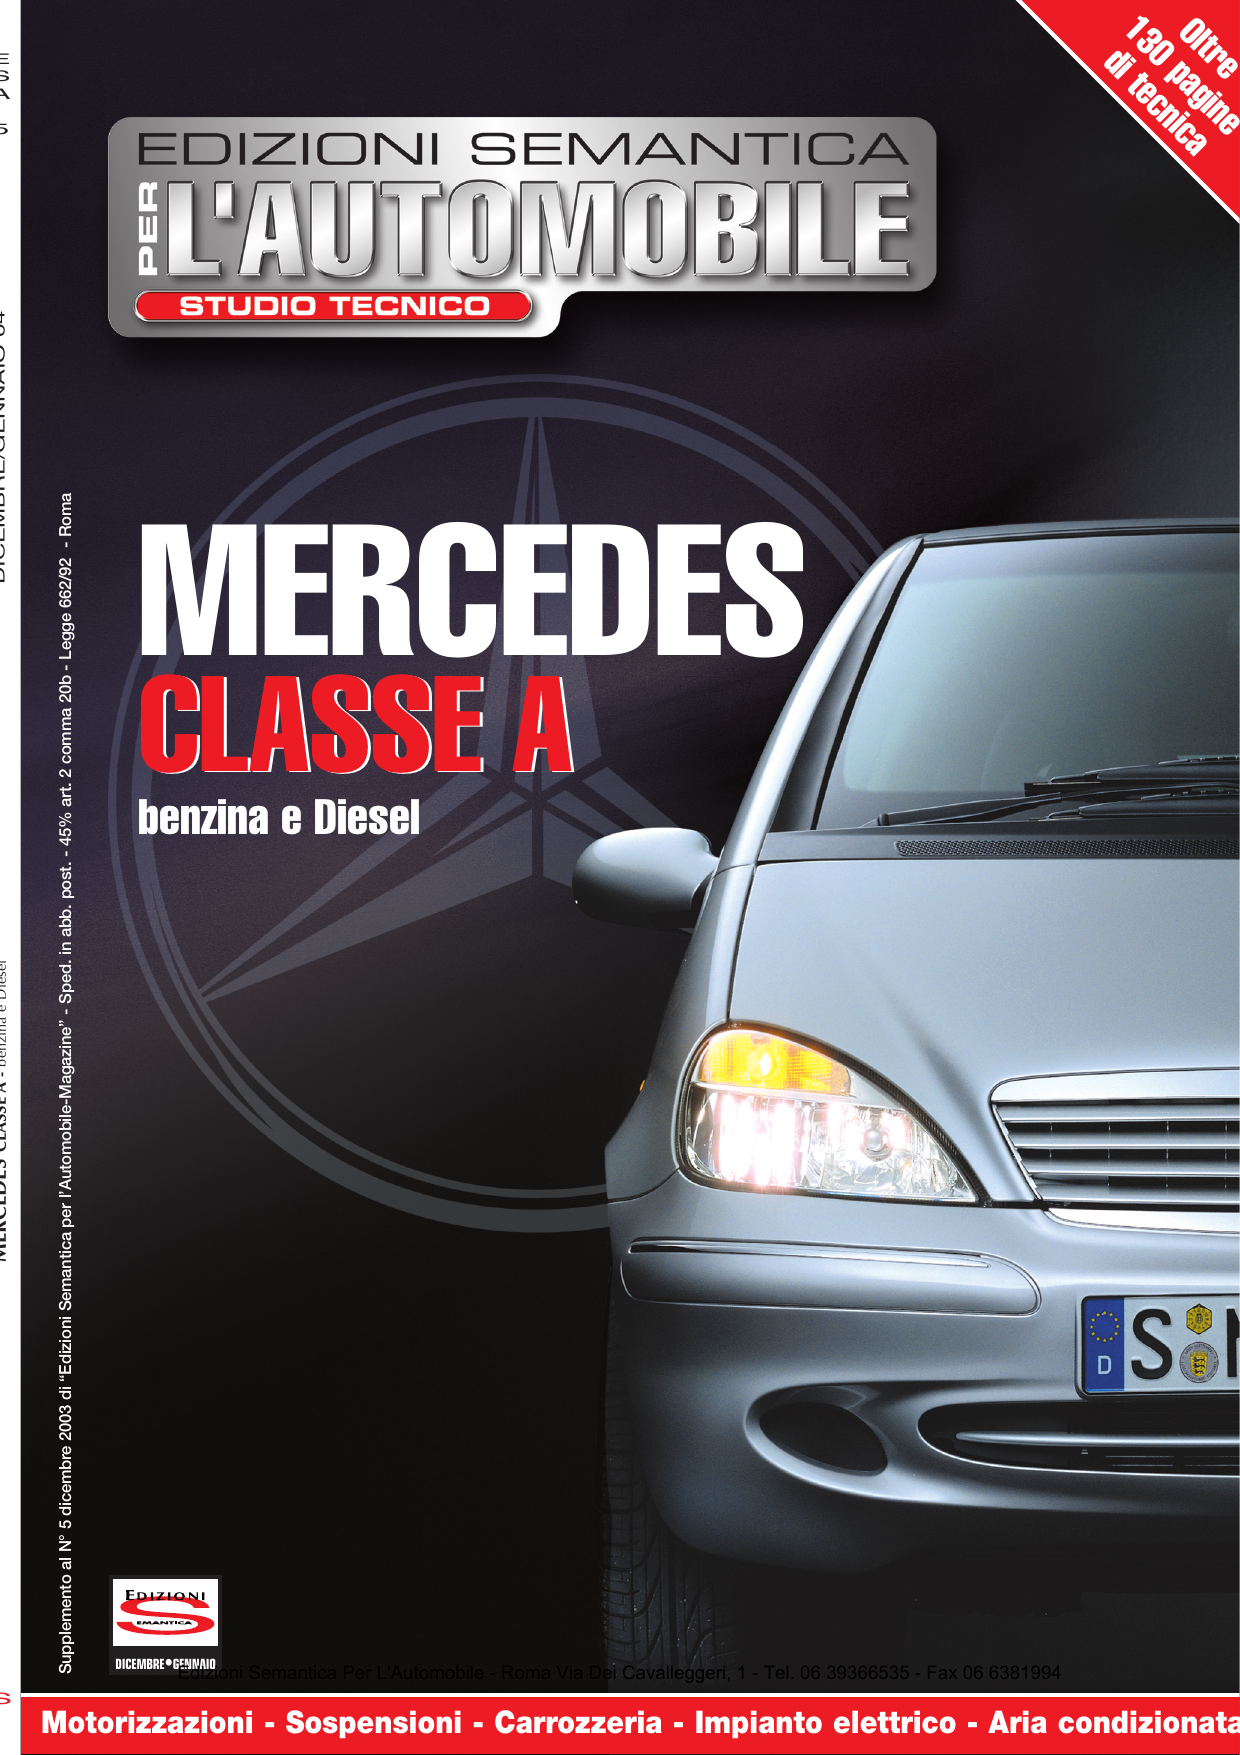 1997-2004 Mercedes W168 Series A-Class, A140, A160, A160CDI, A170CDI, A190, A210 manual Preview image 6